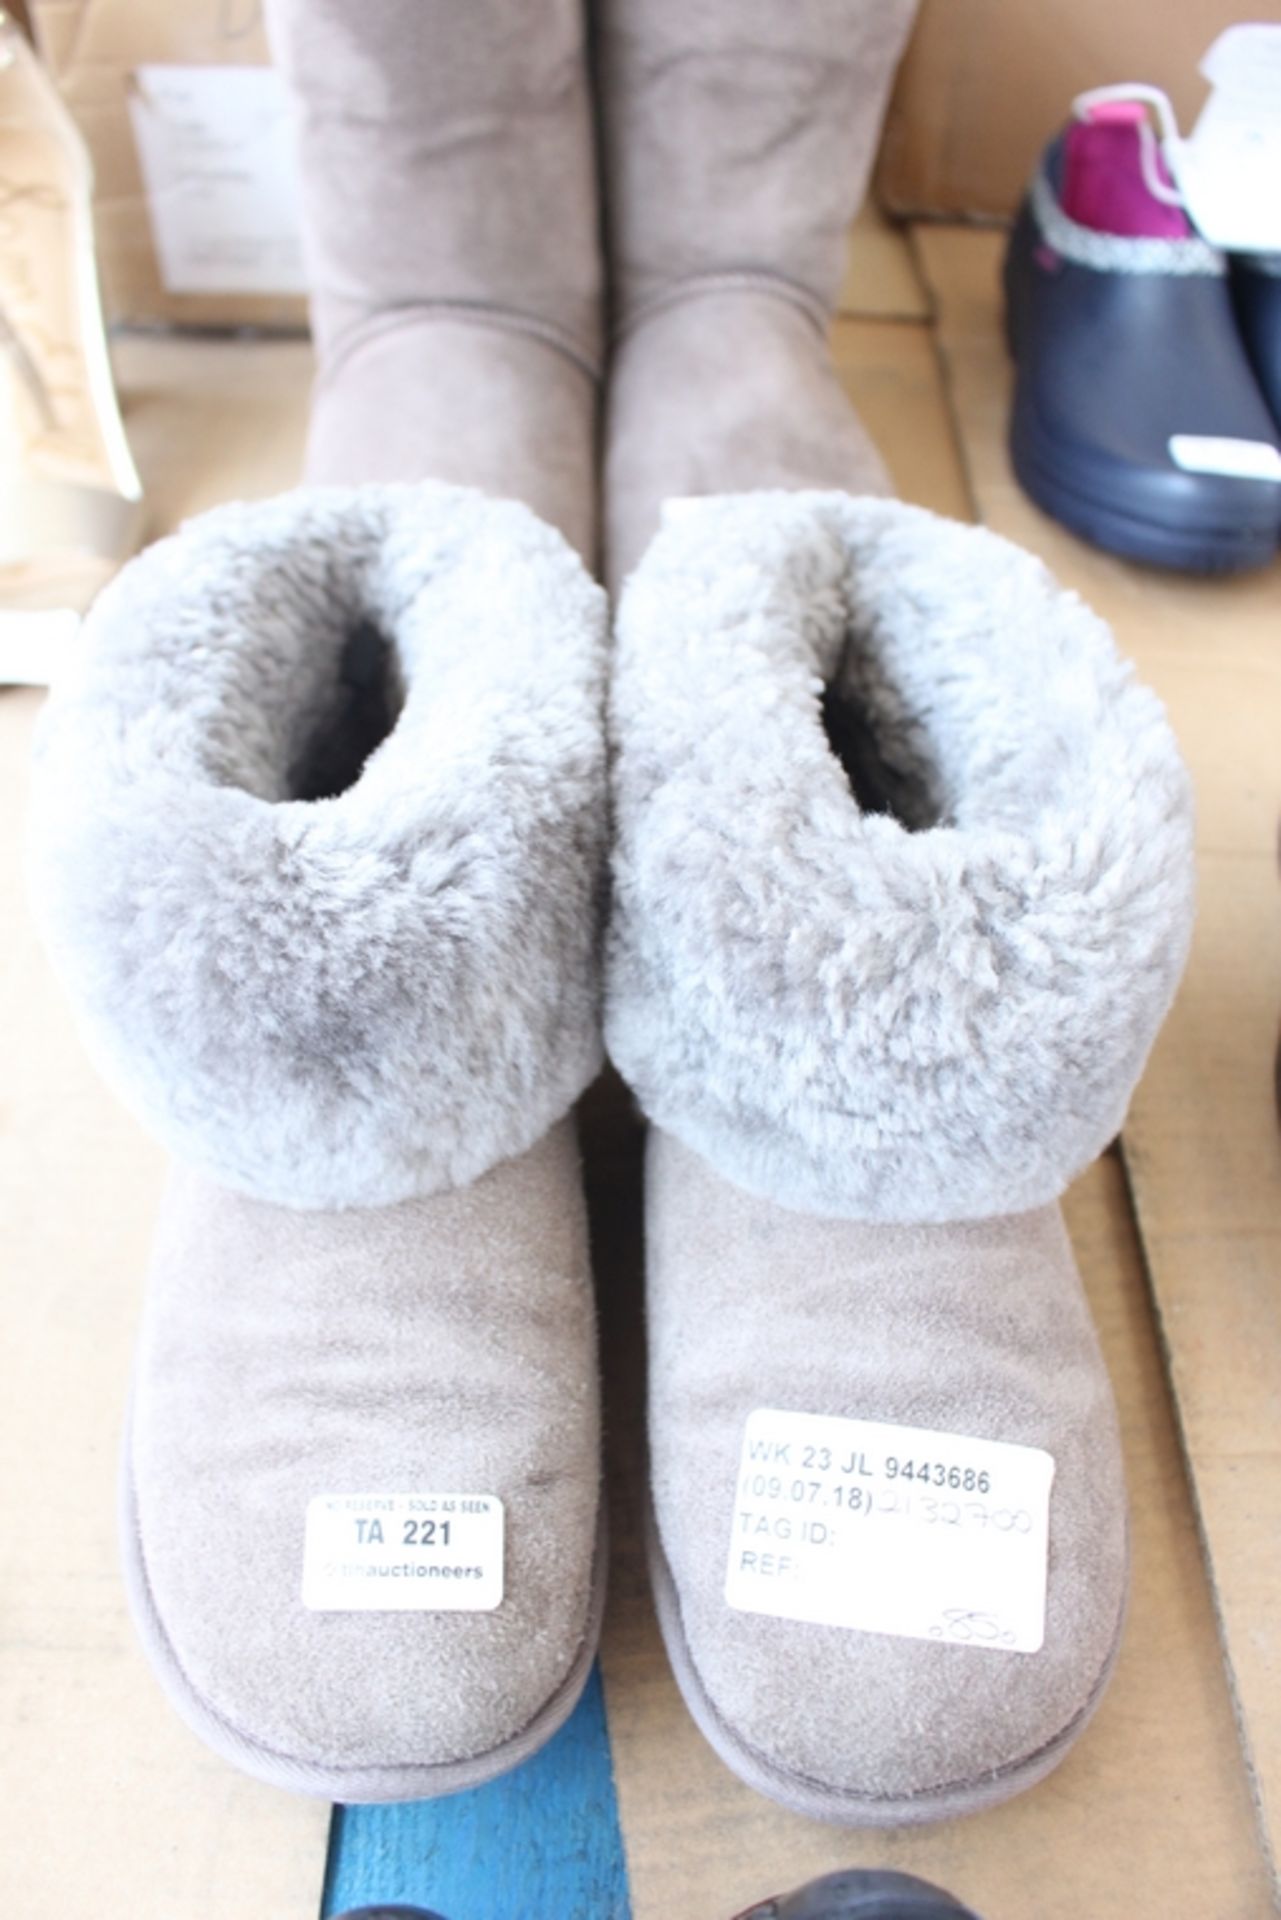 1X PAIR OF JUST SHEEP SKIN SLIPPERS SIZE 5-6 RRP £60 (09.07.18) (2132700)